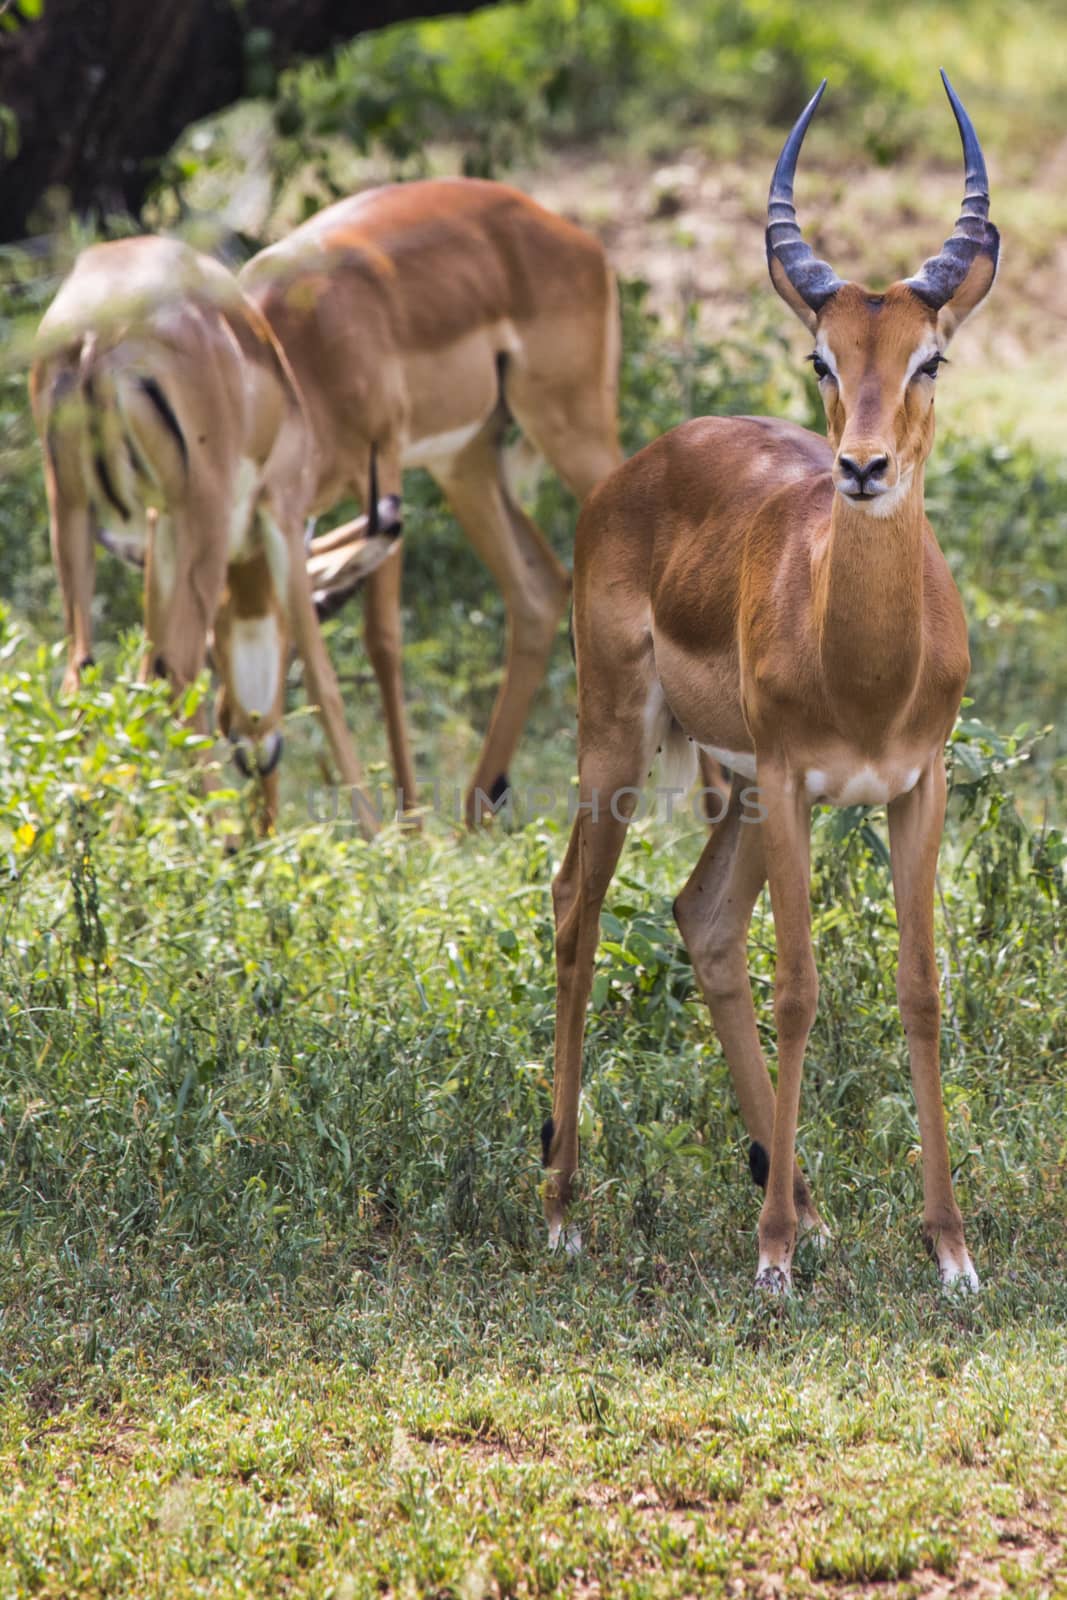 A herd of male impala, Aepyceros melampus, standing in the veget by mariusz_prusaczyk